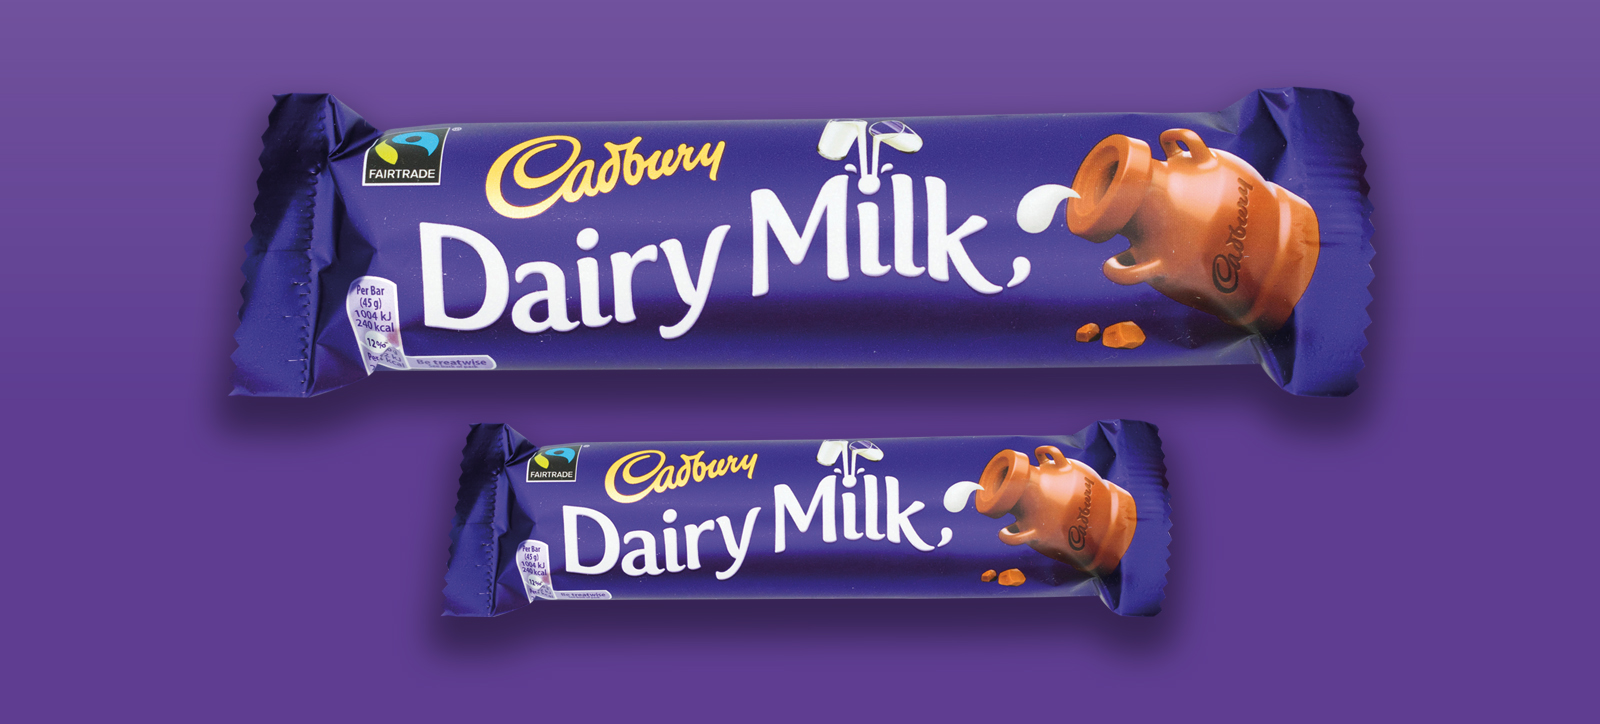 A large chocolate bar with a smaller version next to it, showing how behavioural nudges like 'shrinkflation' can generate profits that taint the social benefits